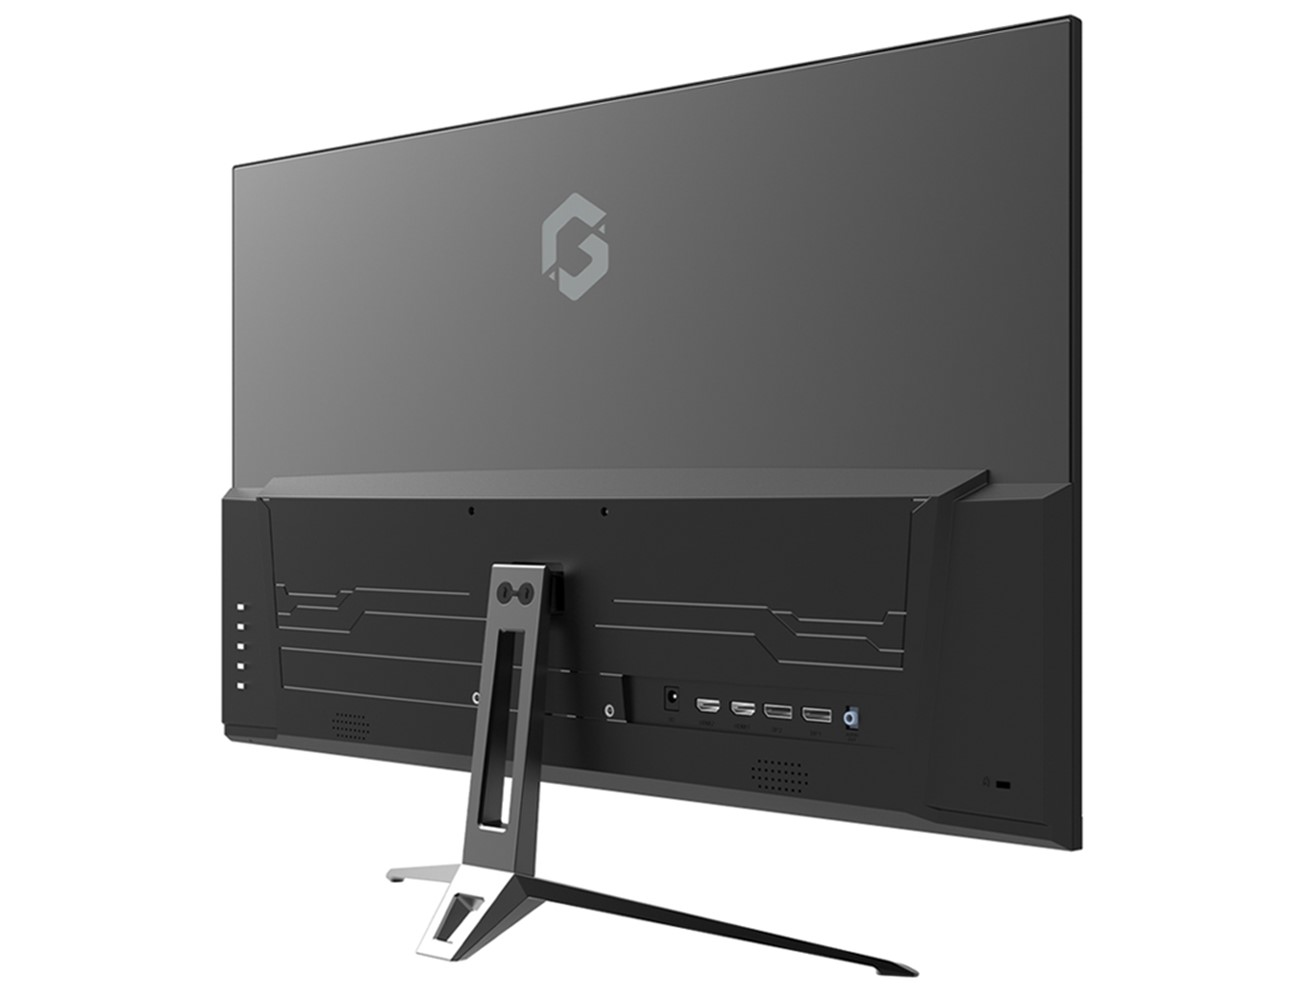 GAMEON GOVE127FHD165 27″ FHD, 165Hz, 1ms Flat IPS Gaming Monitor